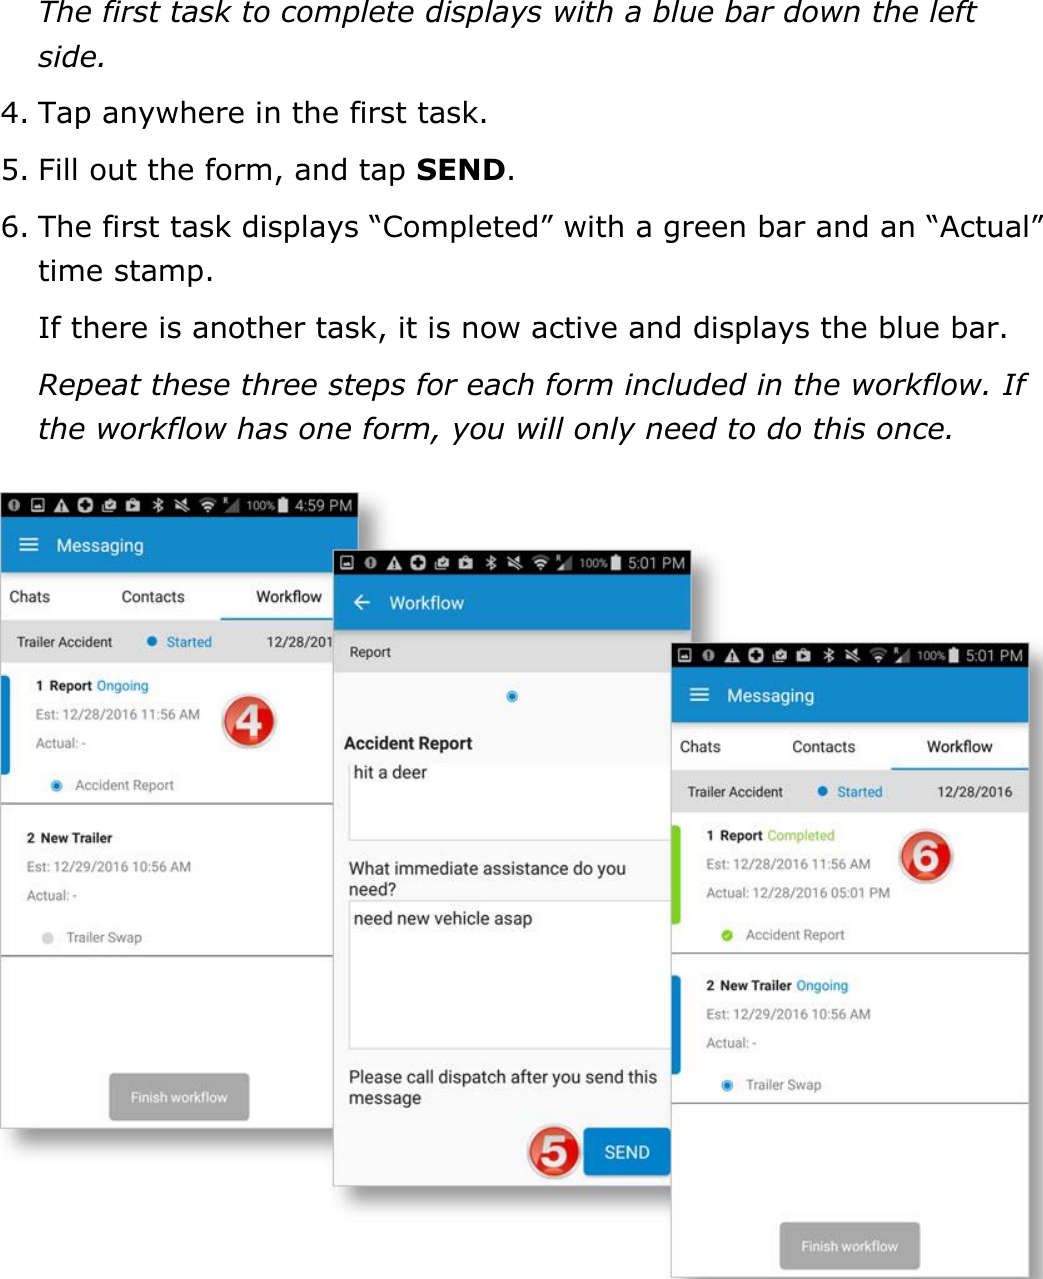 Send Messages, Forms, and Workflows DriverConnect User Guide  79 © 2017, Rand McNally, Inc. The first task to complete displays with a blue bar down the left side. 4. Tap anywhere in the first task. 5. Fill out the form, and tap SEND. 6. The first task displays “Completed” with a green bar and an “Actual” time stamp. If there is another task, it is now active and displays the blue bar. Repeat these three steps for each form included in the workflow. If the workflow has one form, you will only need to do this once.    